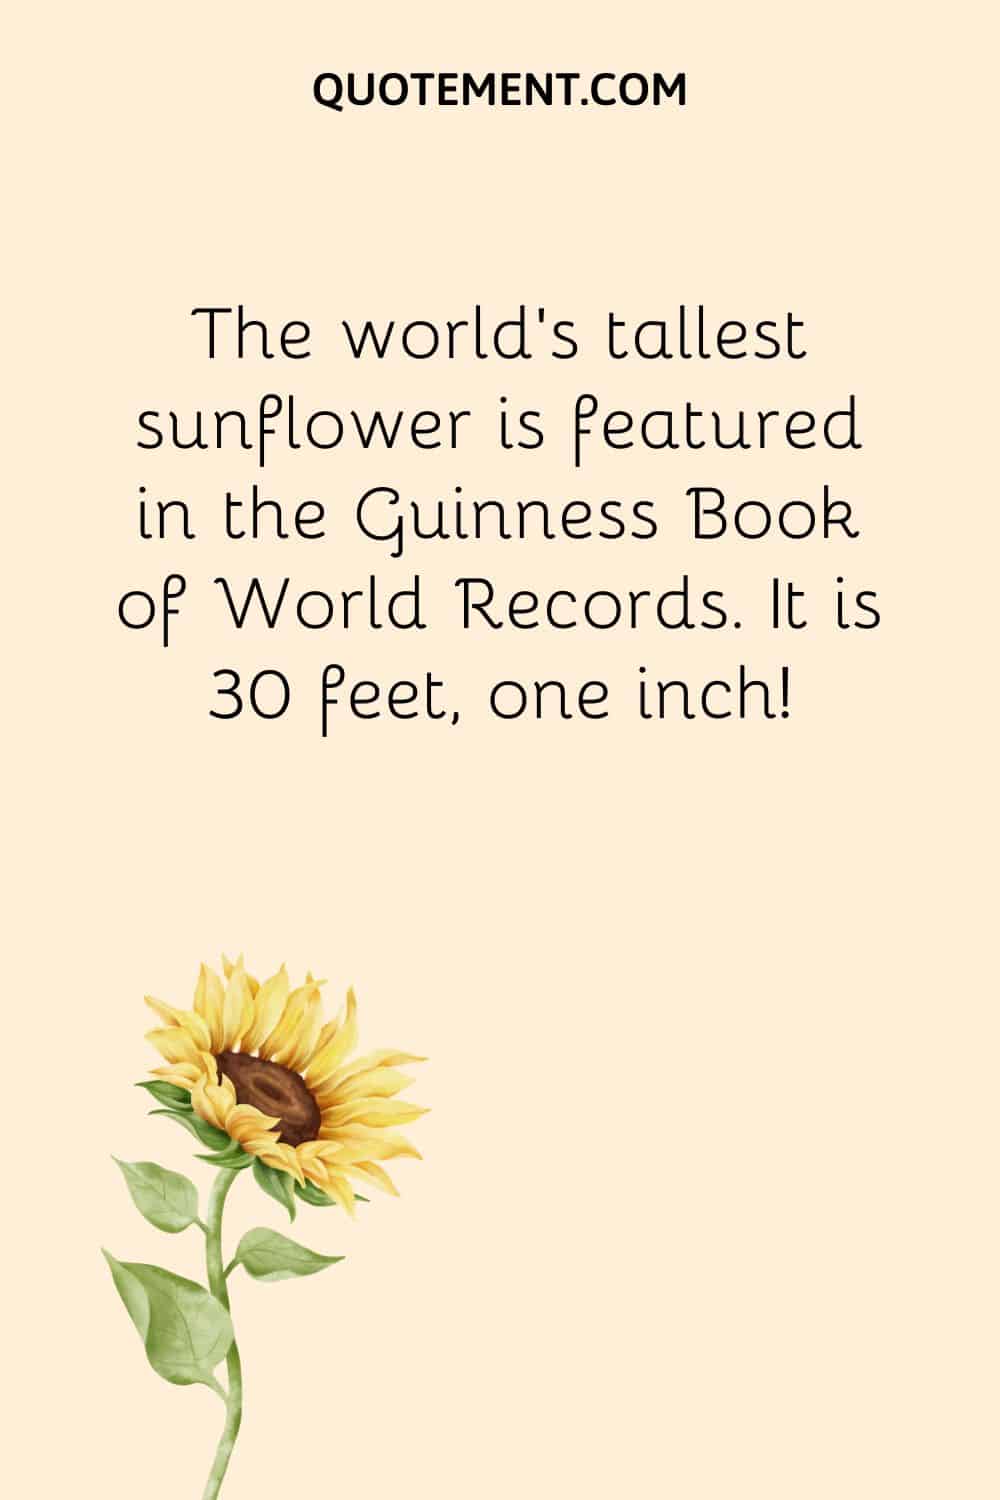 The world’s tallest sunflower is featured in the Guinness Book of World Records